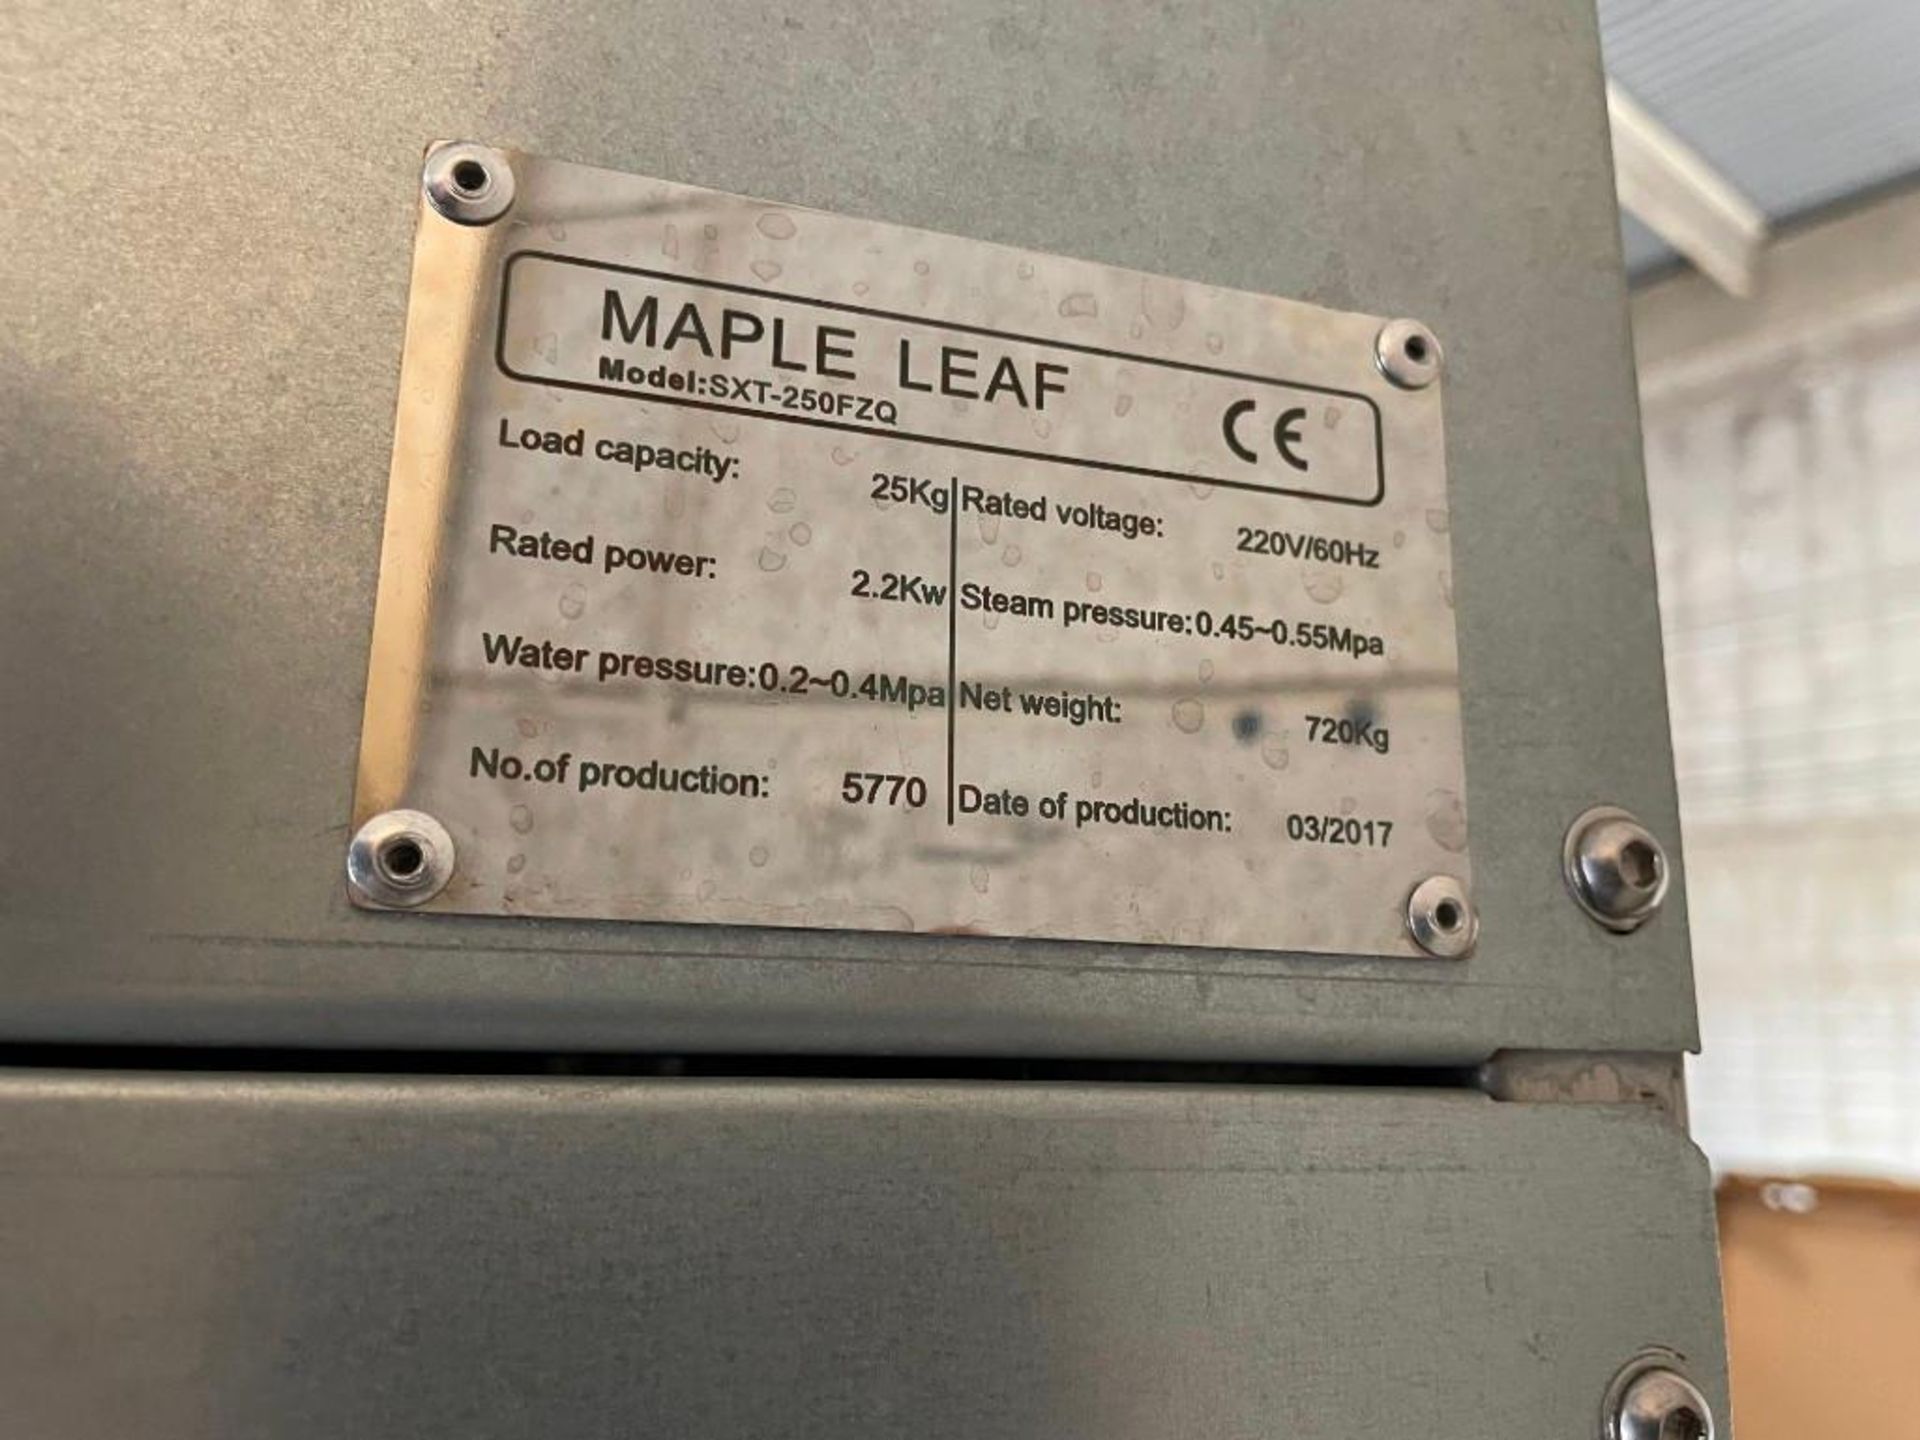 MAPLE LEAF SXT-250FZQ INDUSTRIAL WASHING MACHINE - 25KG LOAD CAPACITY - Image 8 of 9